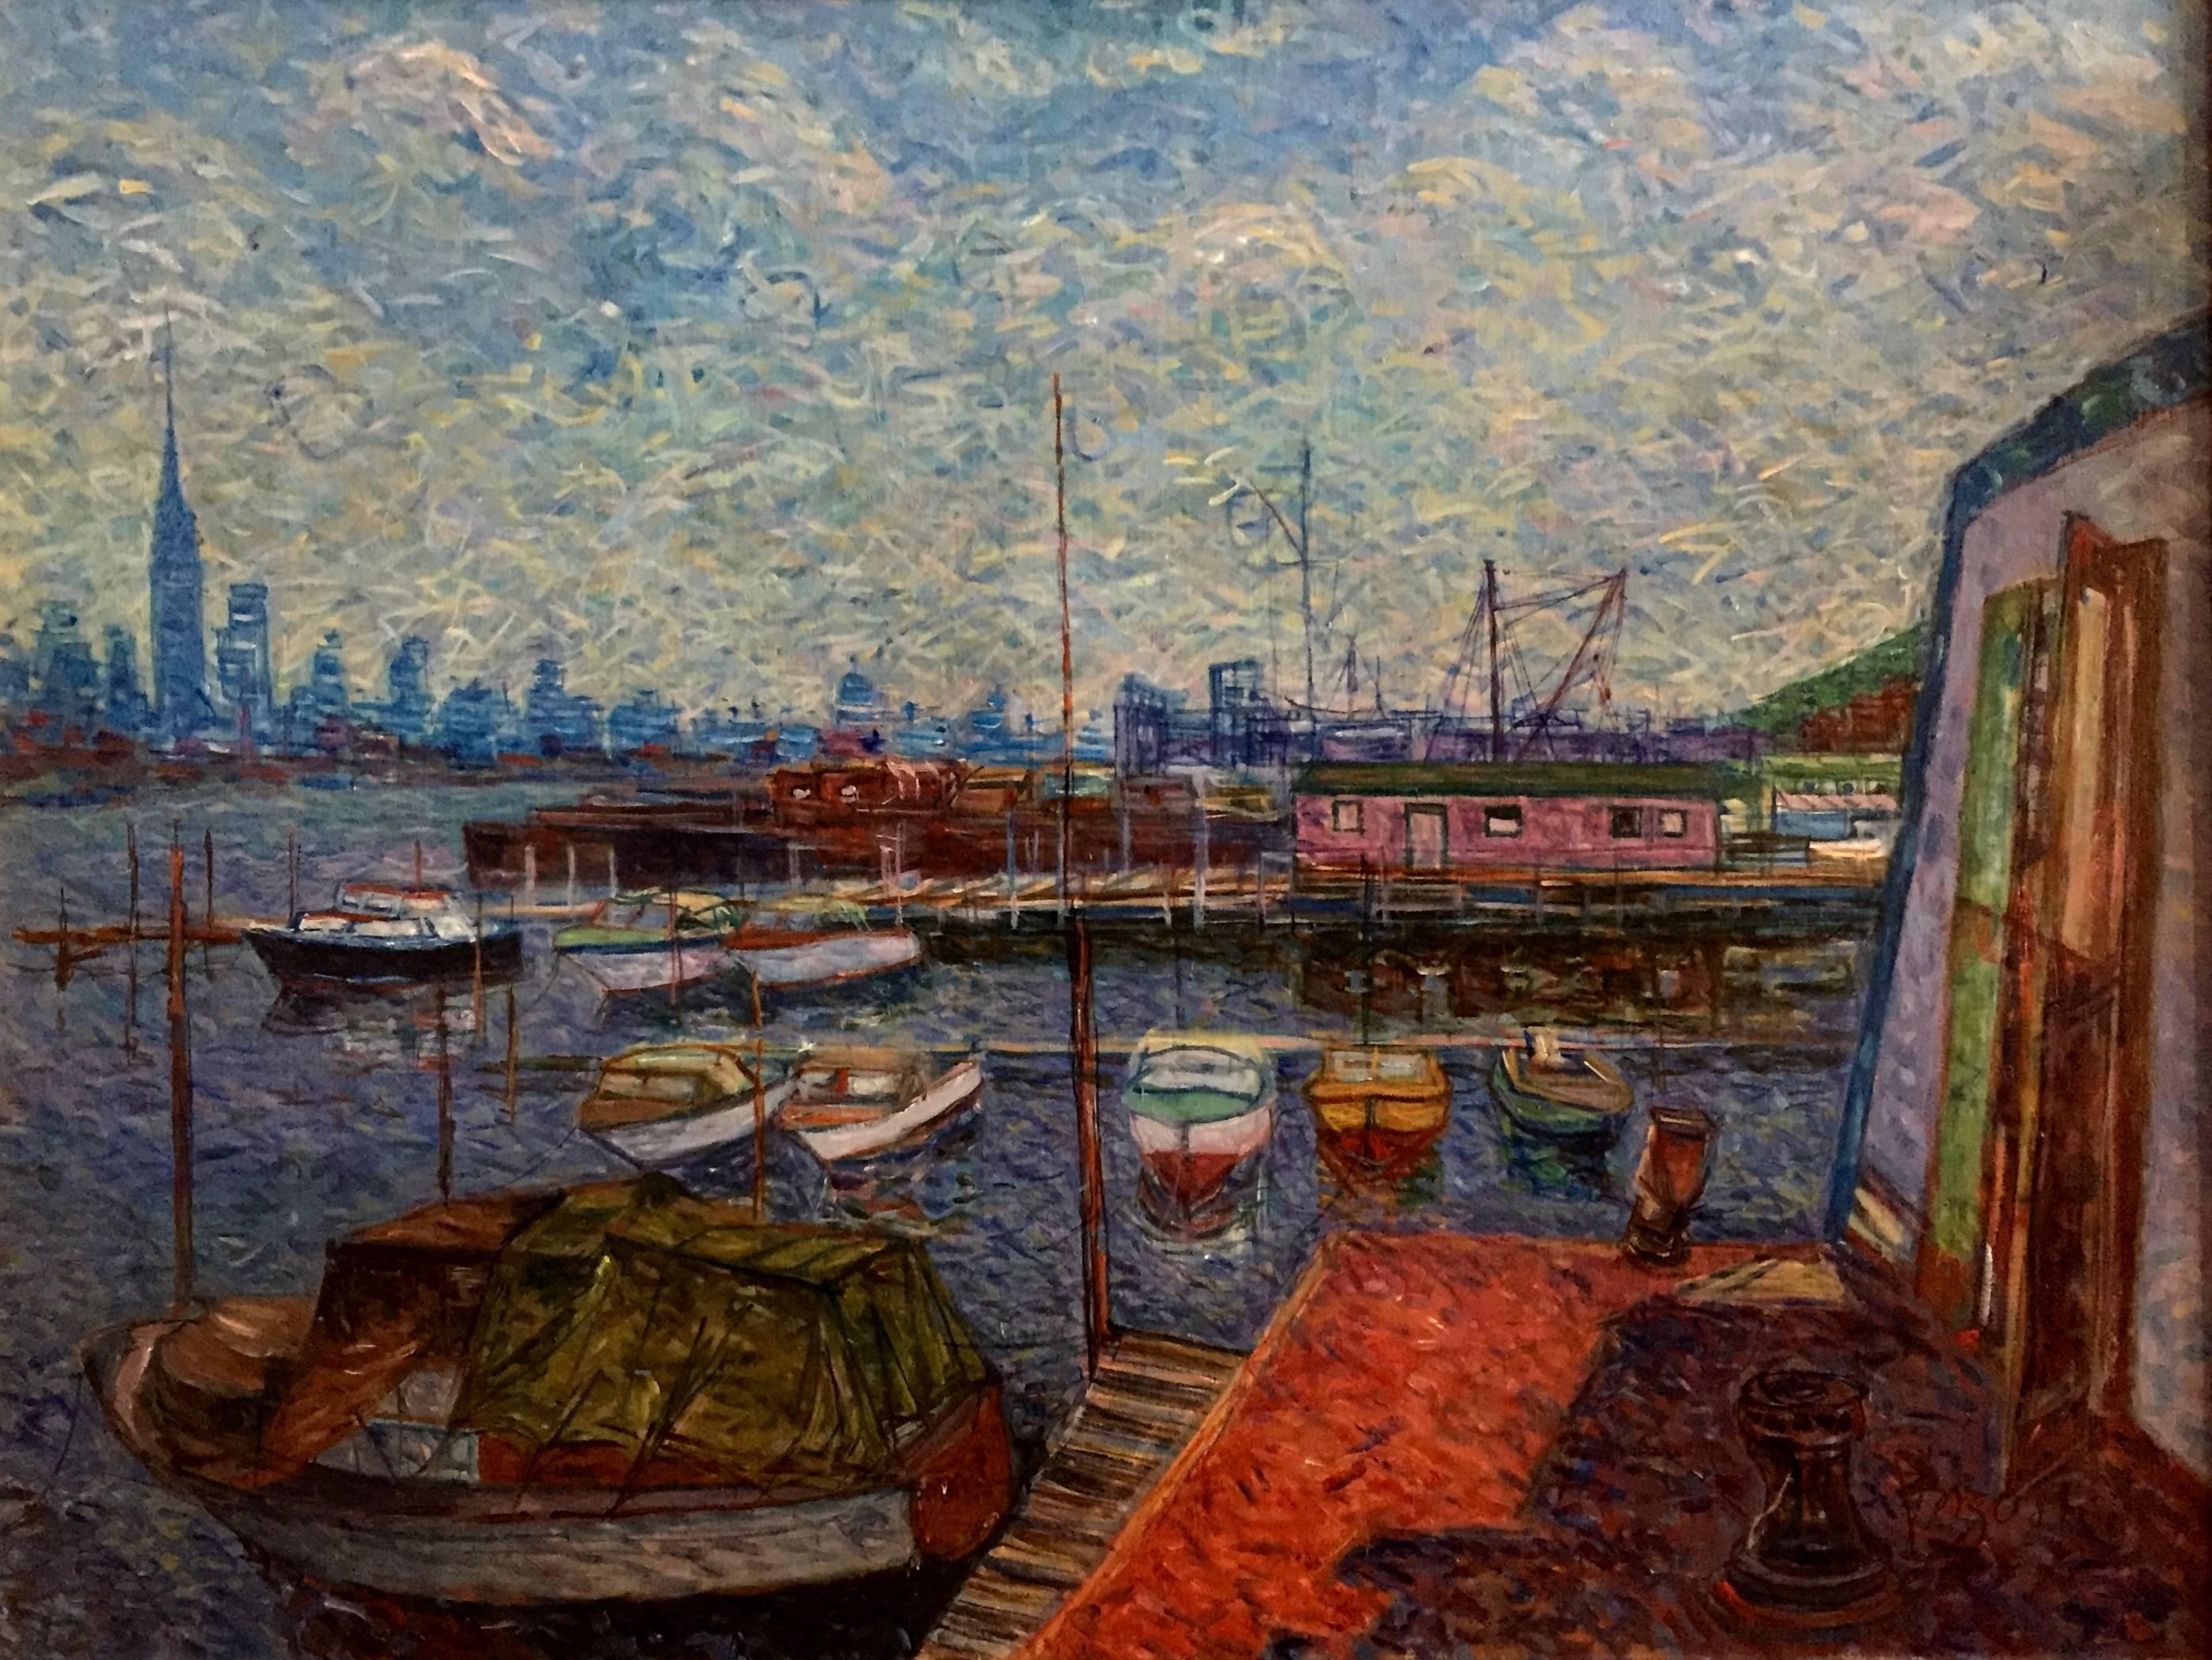 A celebrated Polish-American artist who spent much of his painting career living in New York City starting in the mid-1950s. His canvases are always filled with color and a vibrancy that speaks to a positive life outlook. This New York harbor scene